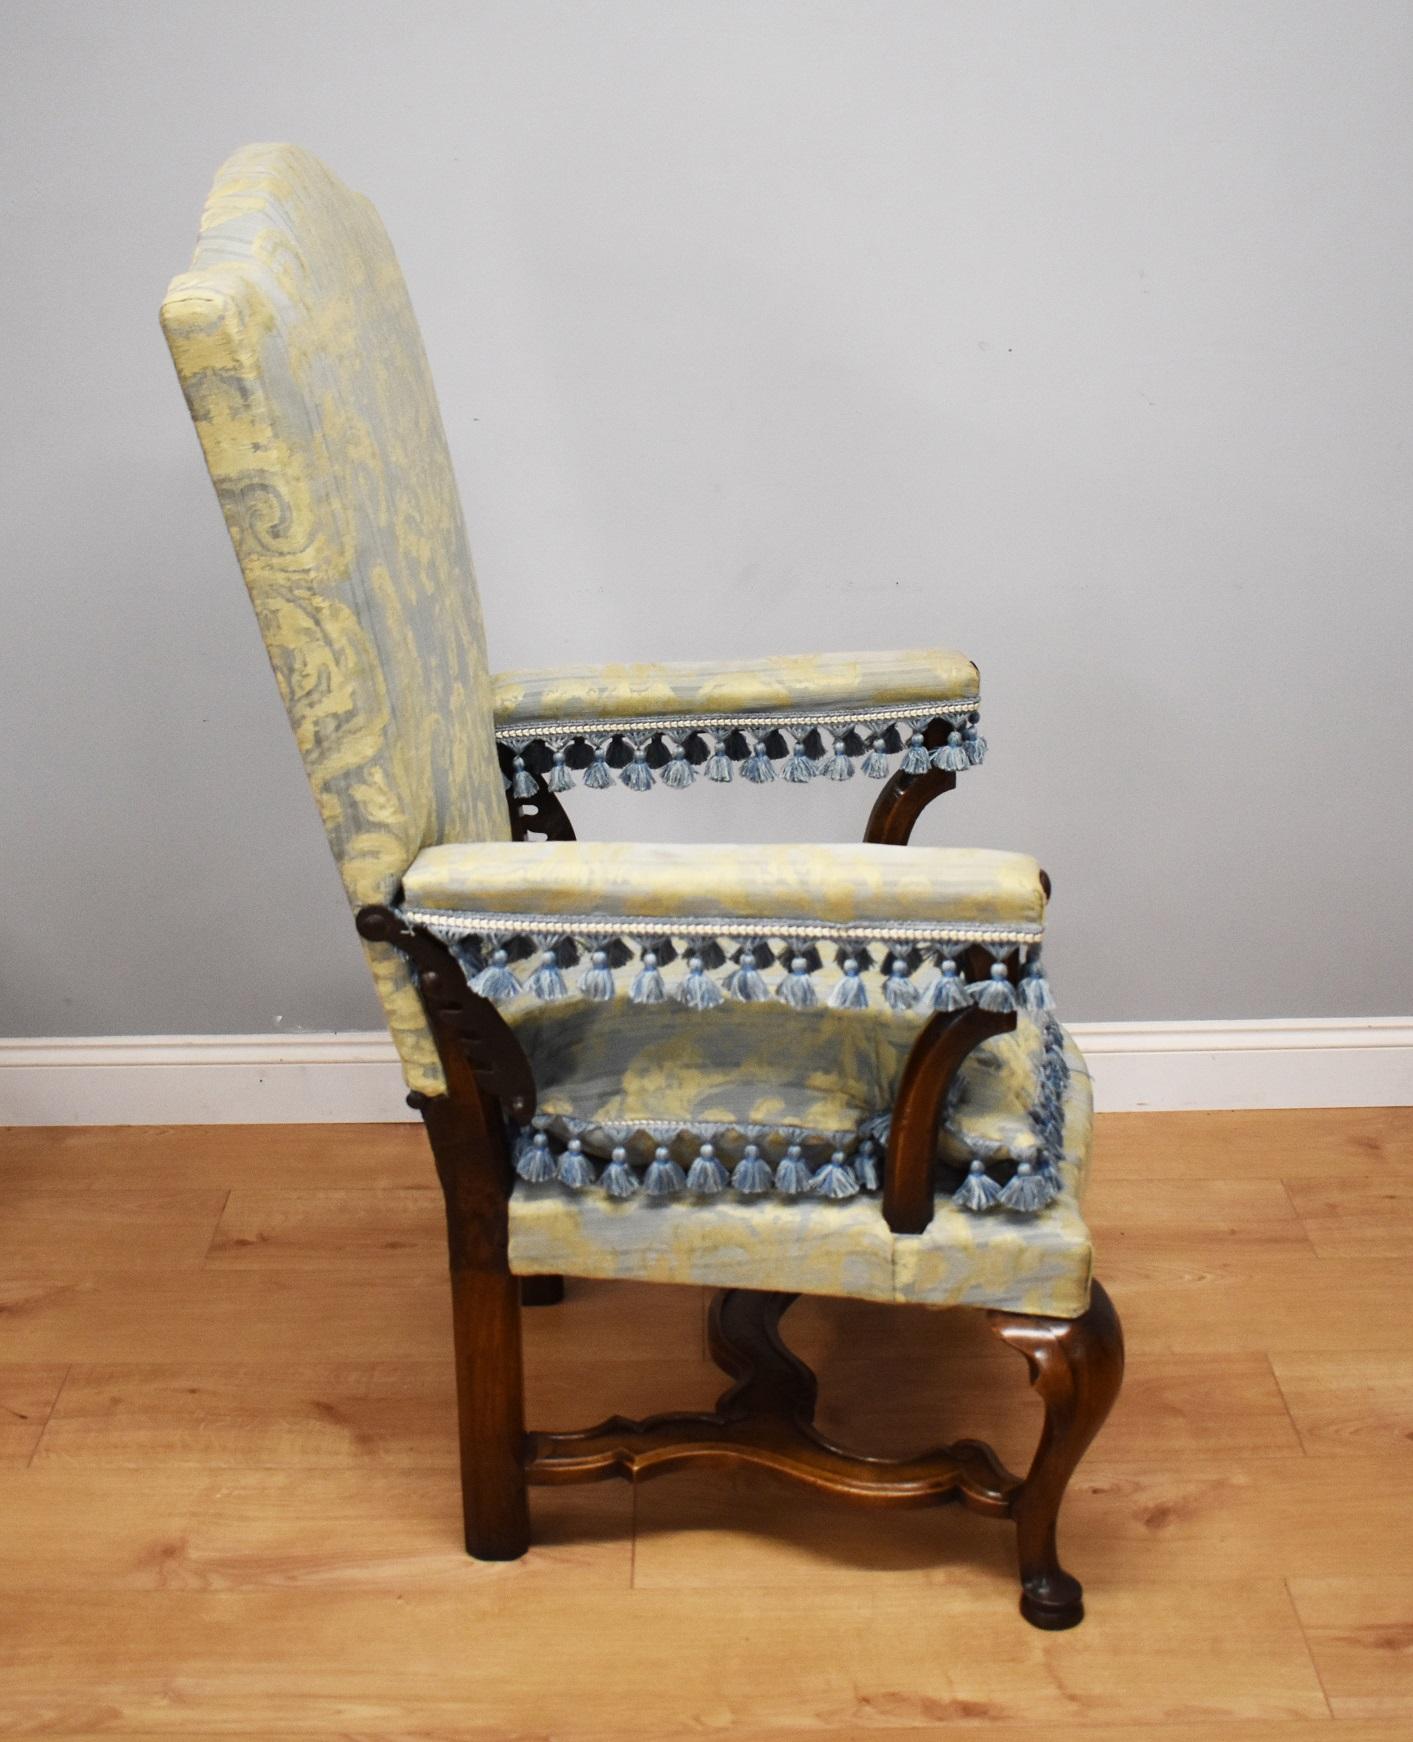 For sale is a fine and unusual 18th century French walnut reclining chair, or 